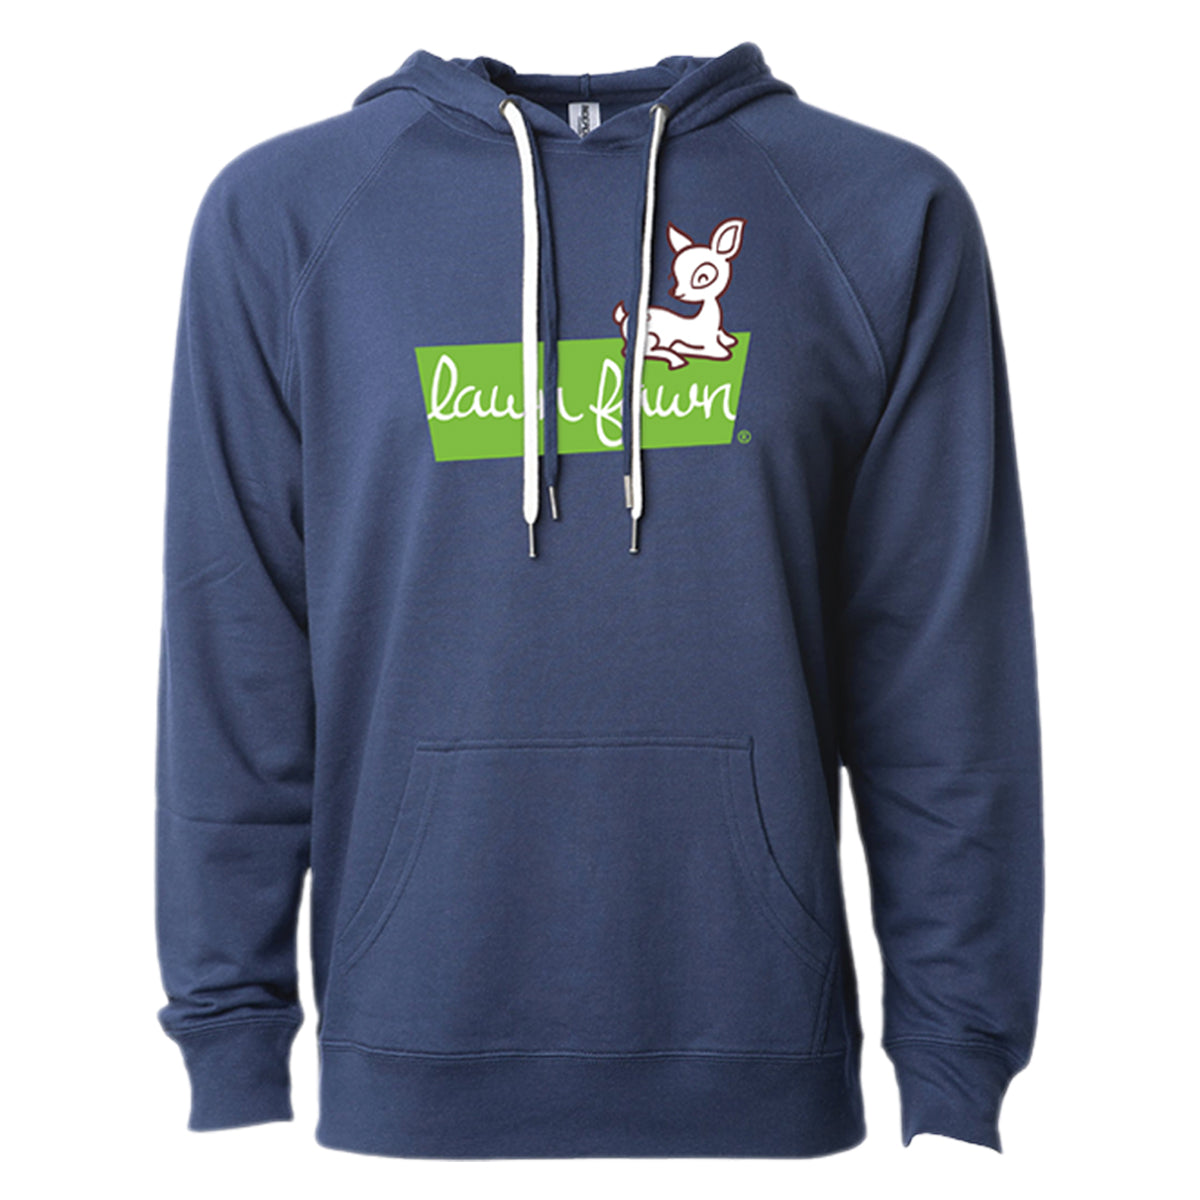 lawn fawn pullover hoodie - 3XL